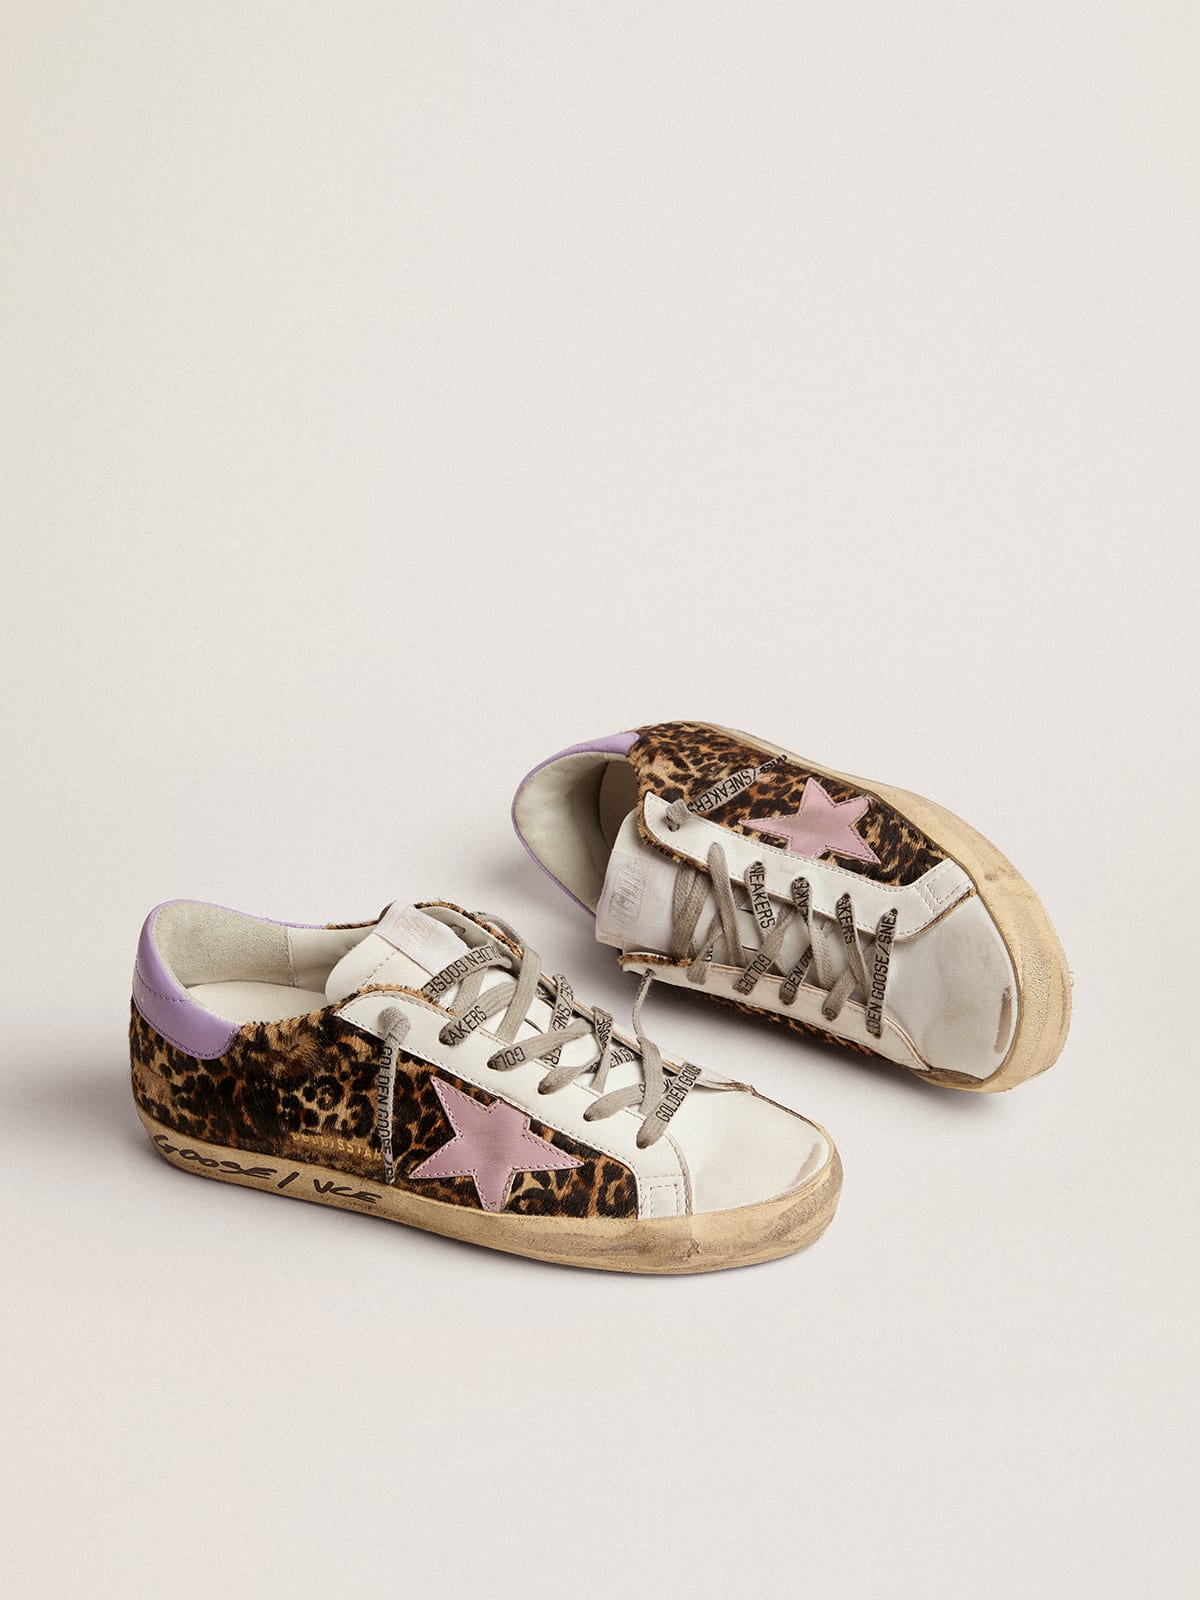 Golden Goose - Super-Star LTD sneakers in leopard-print pony skin with salmon-colored laminated leather star and purple leather heel tab in 